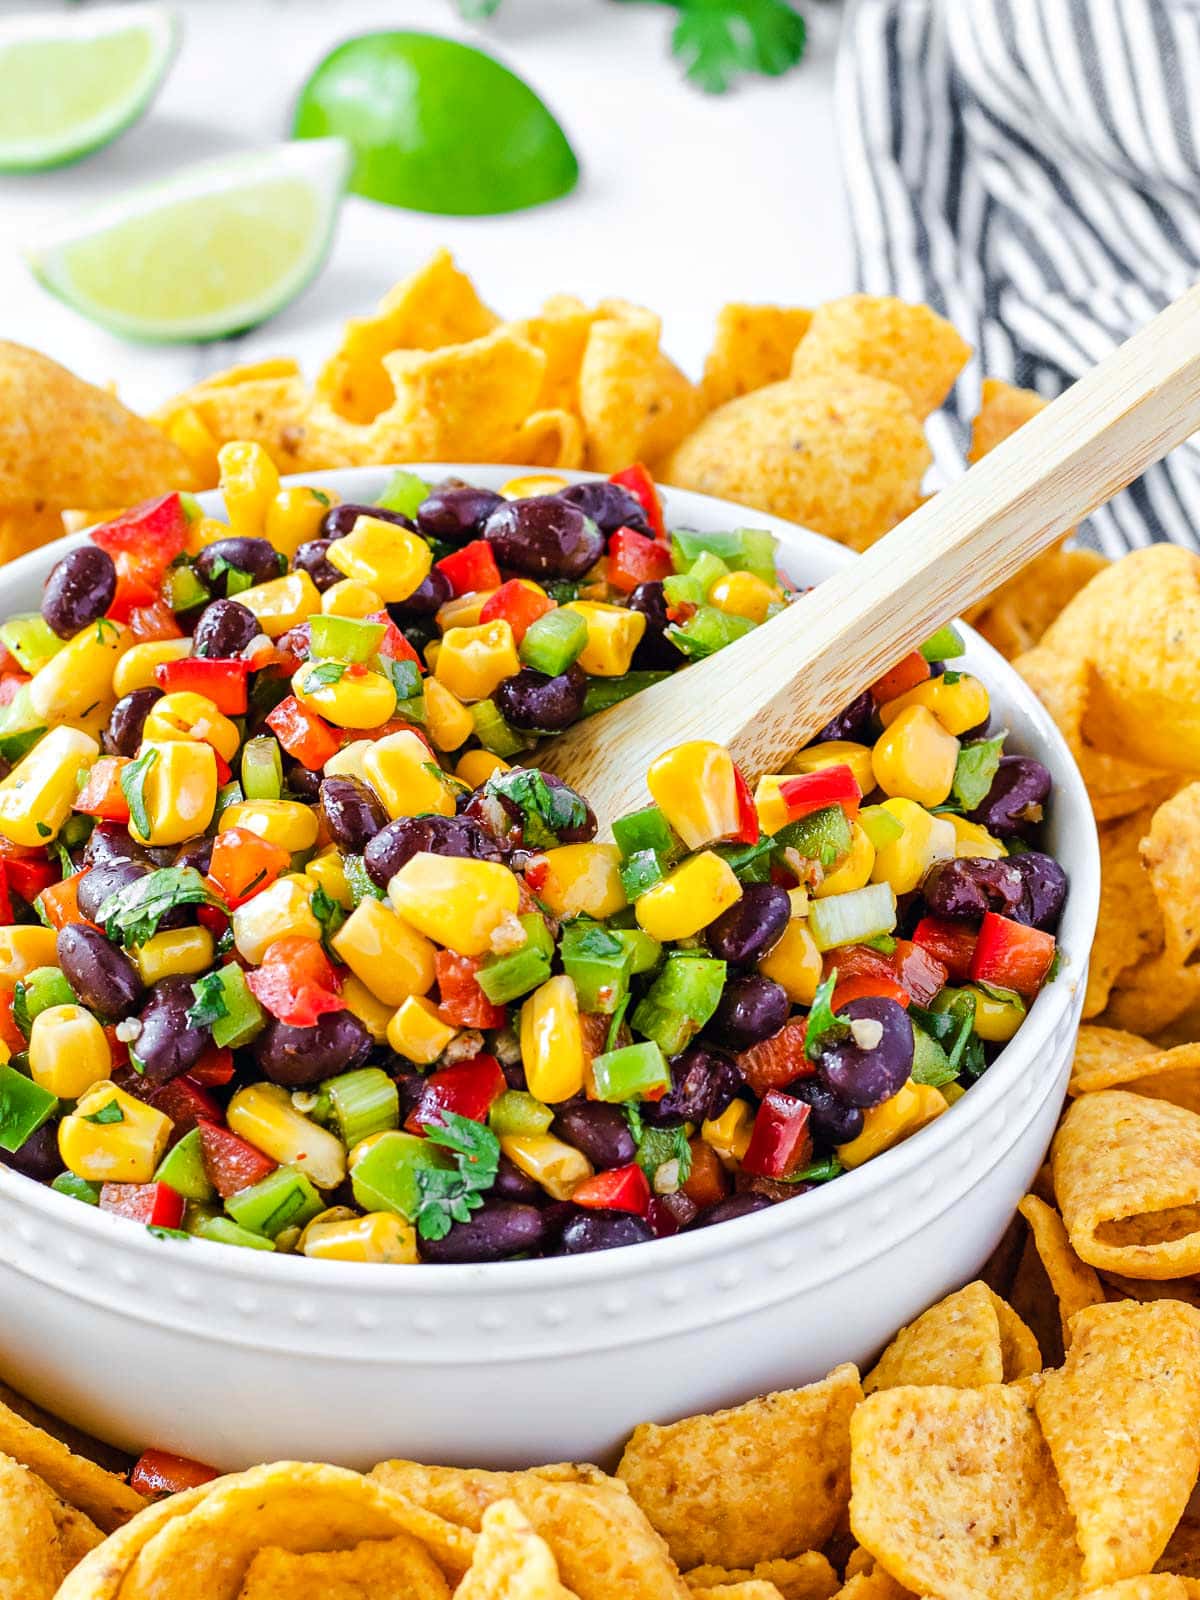 corn salsa with black beans in white bowl and wood spoon inserted. corn chips surrounding the bowl with limes in the background.